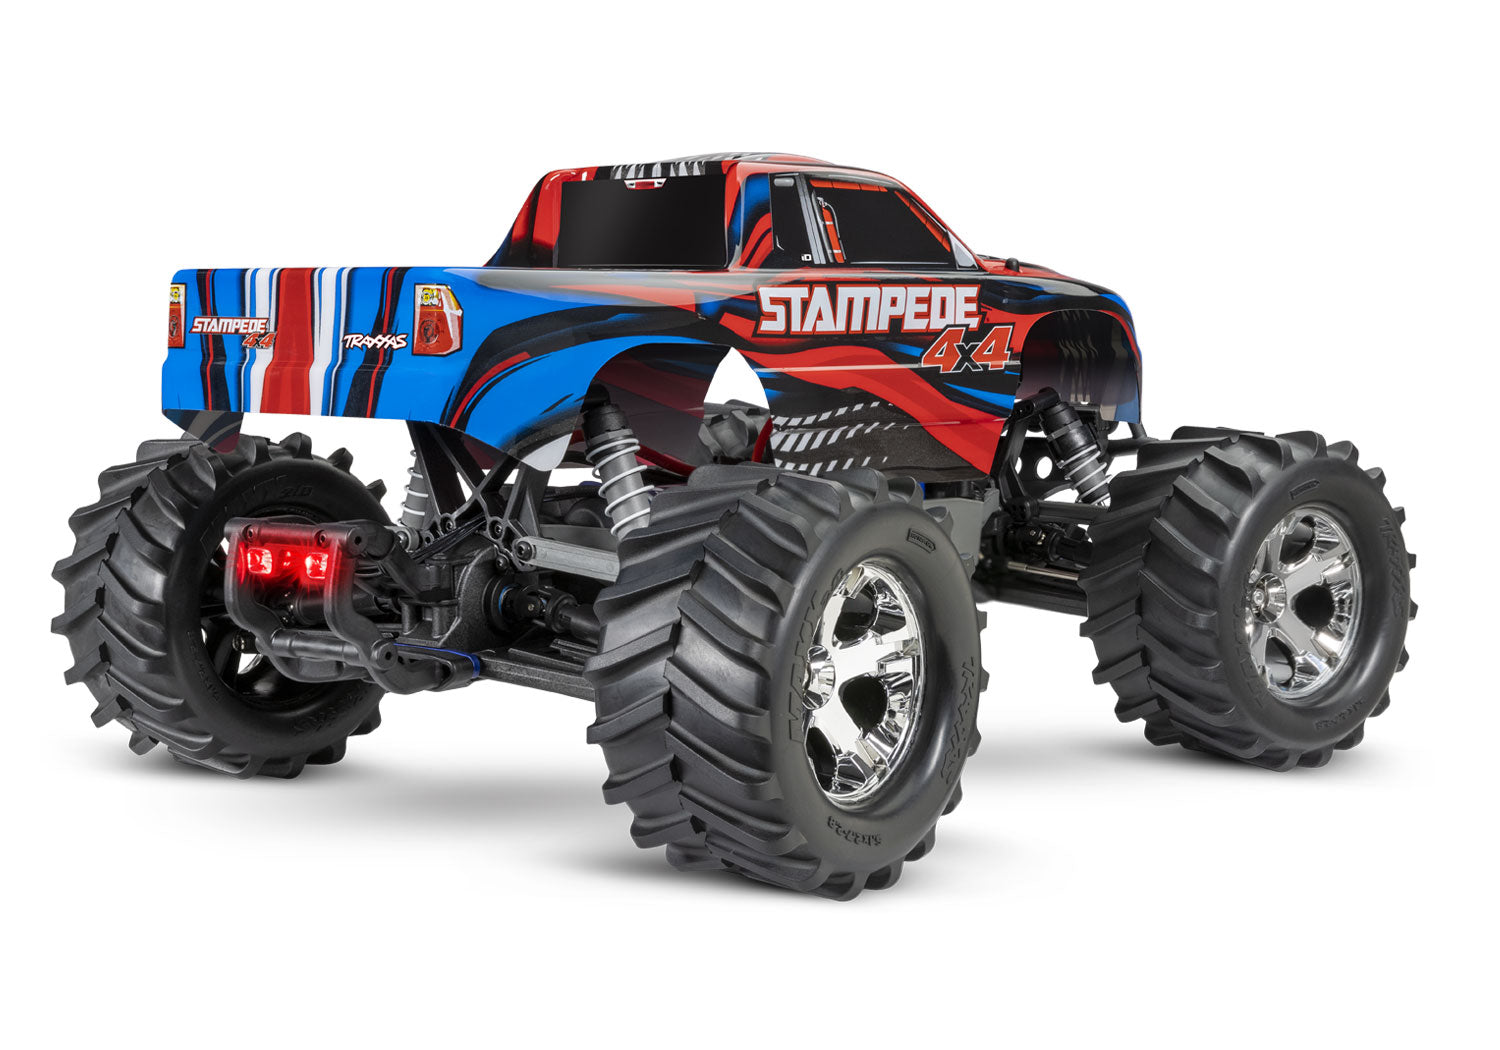 TRAXXAS STAMPEDE w/ LED LIGHTS (Red) - 67054-61-RED